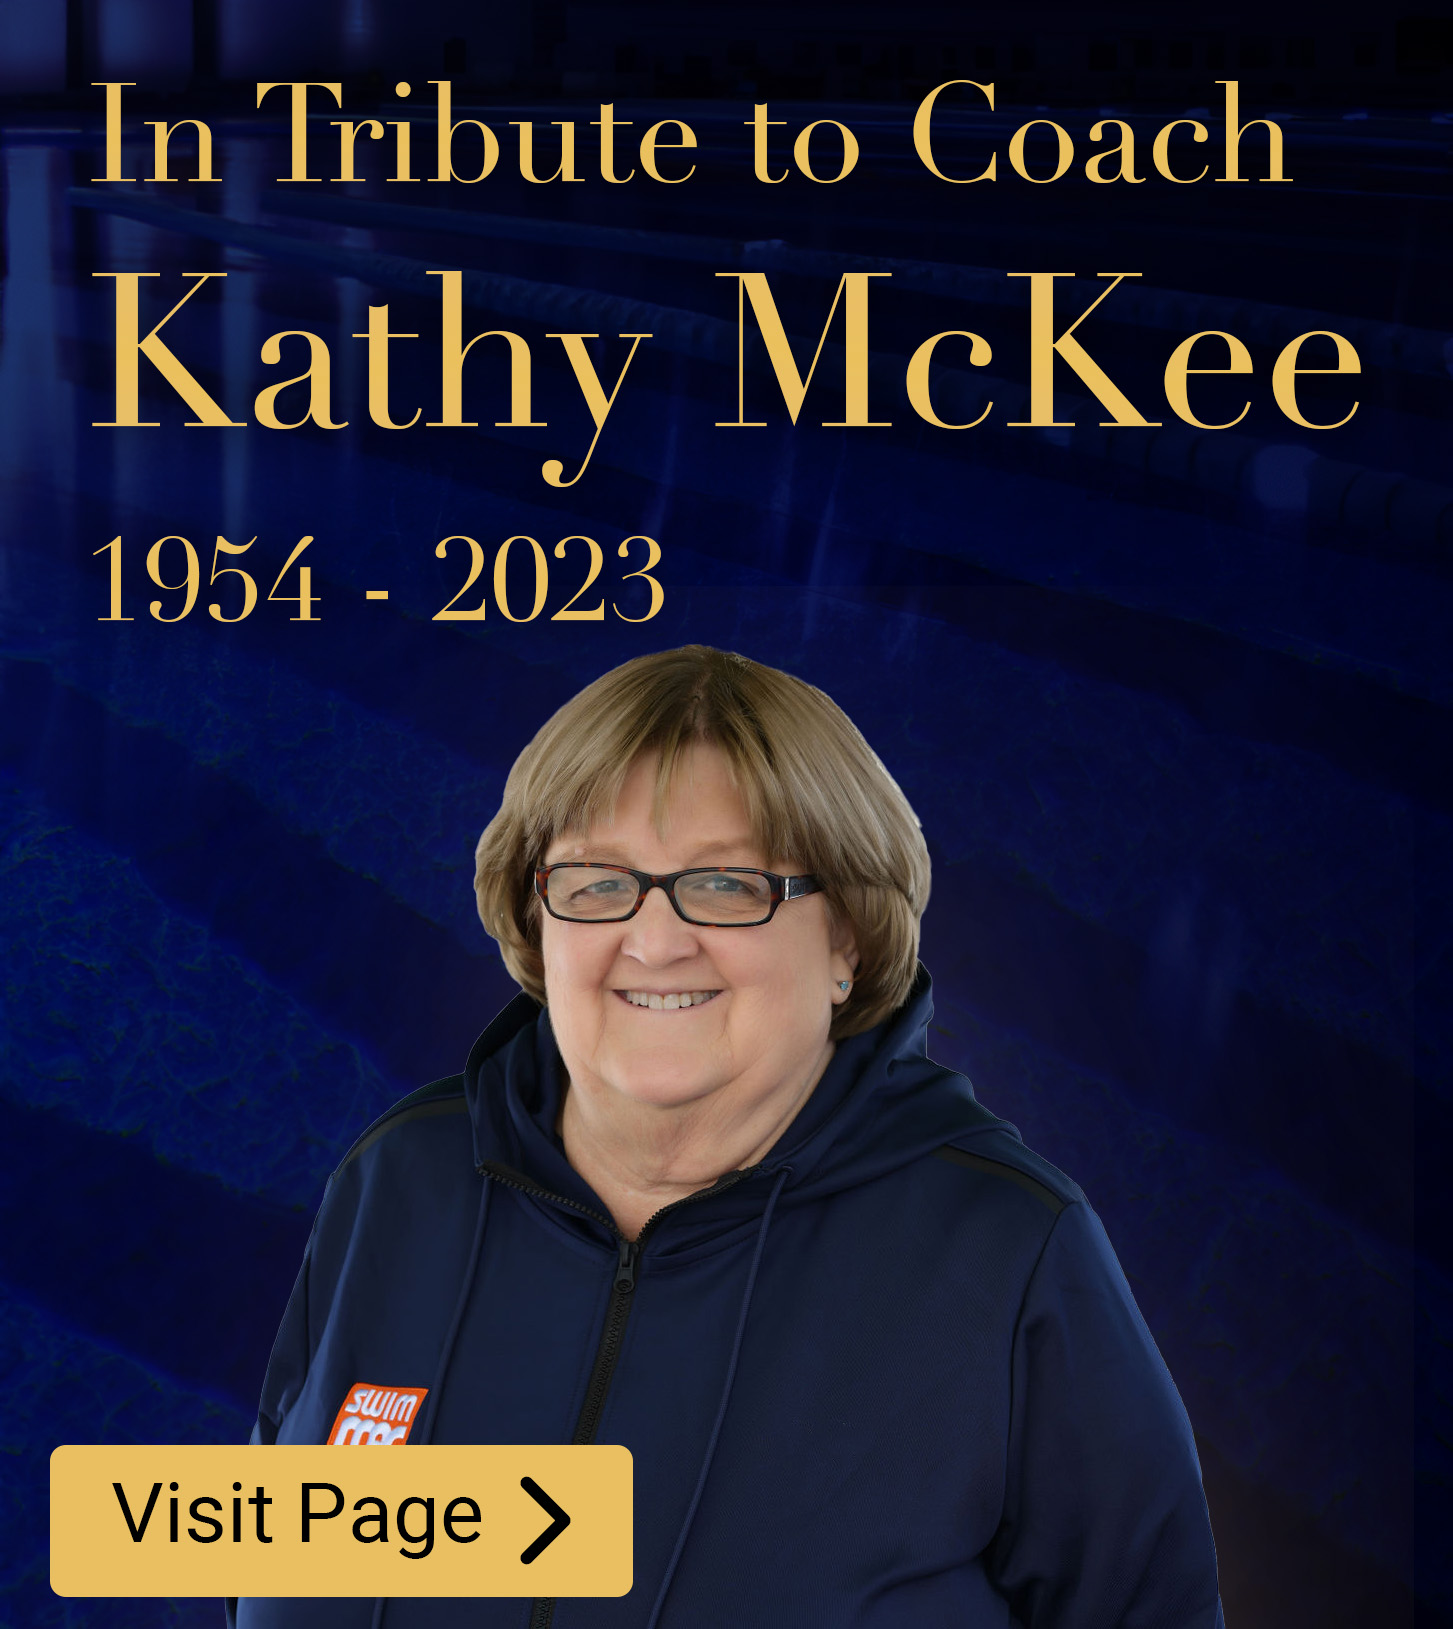 In Tribute to Coach Kathy McKee